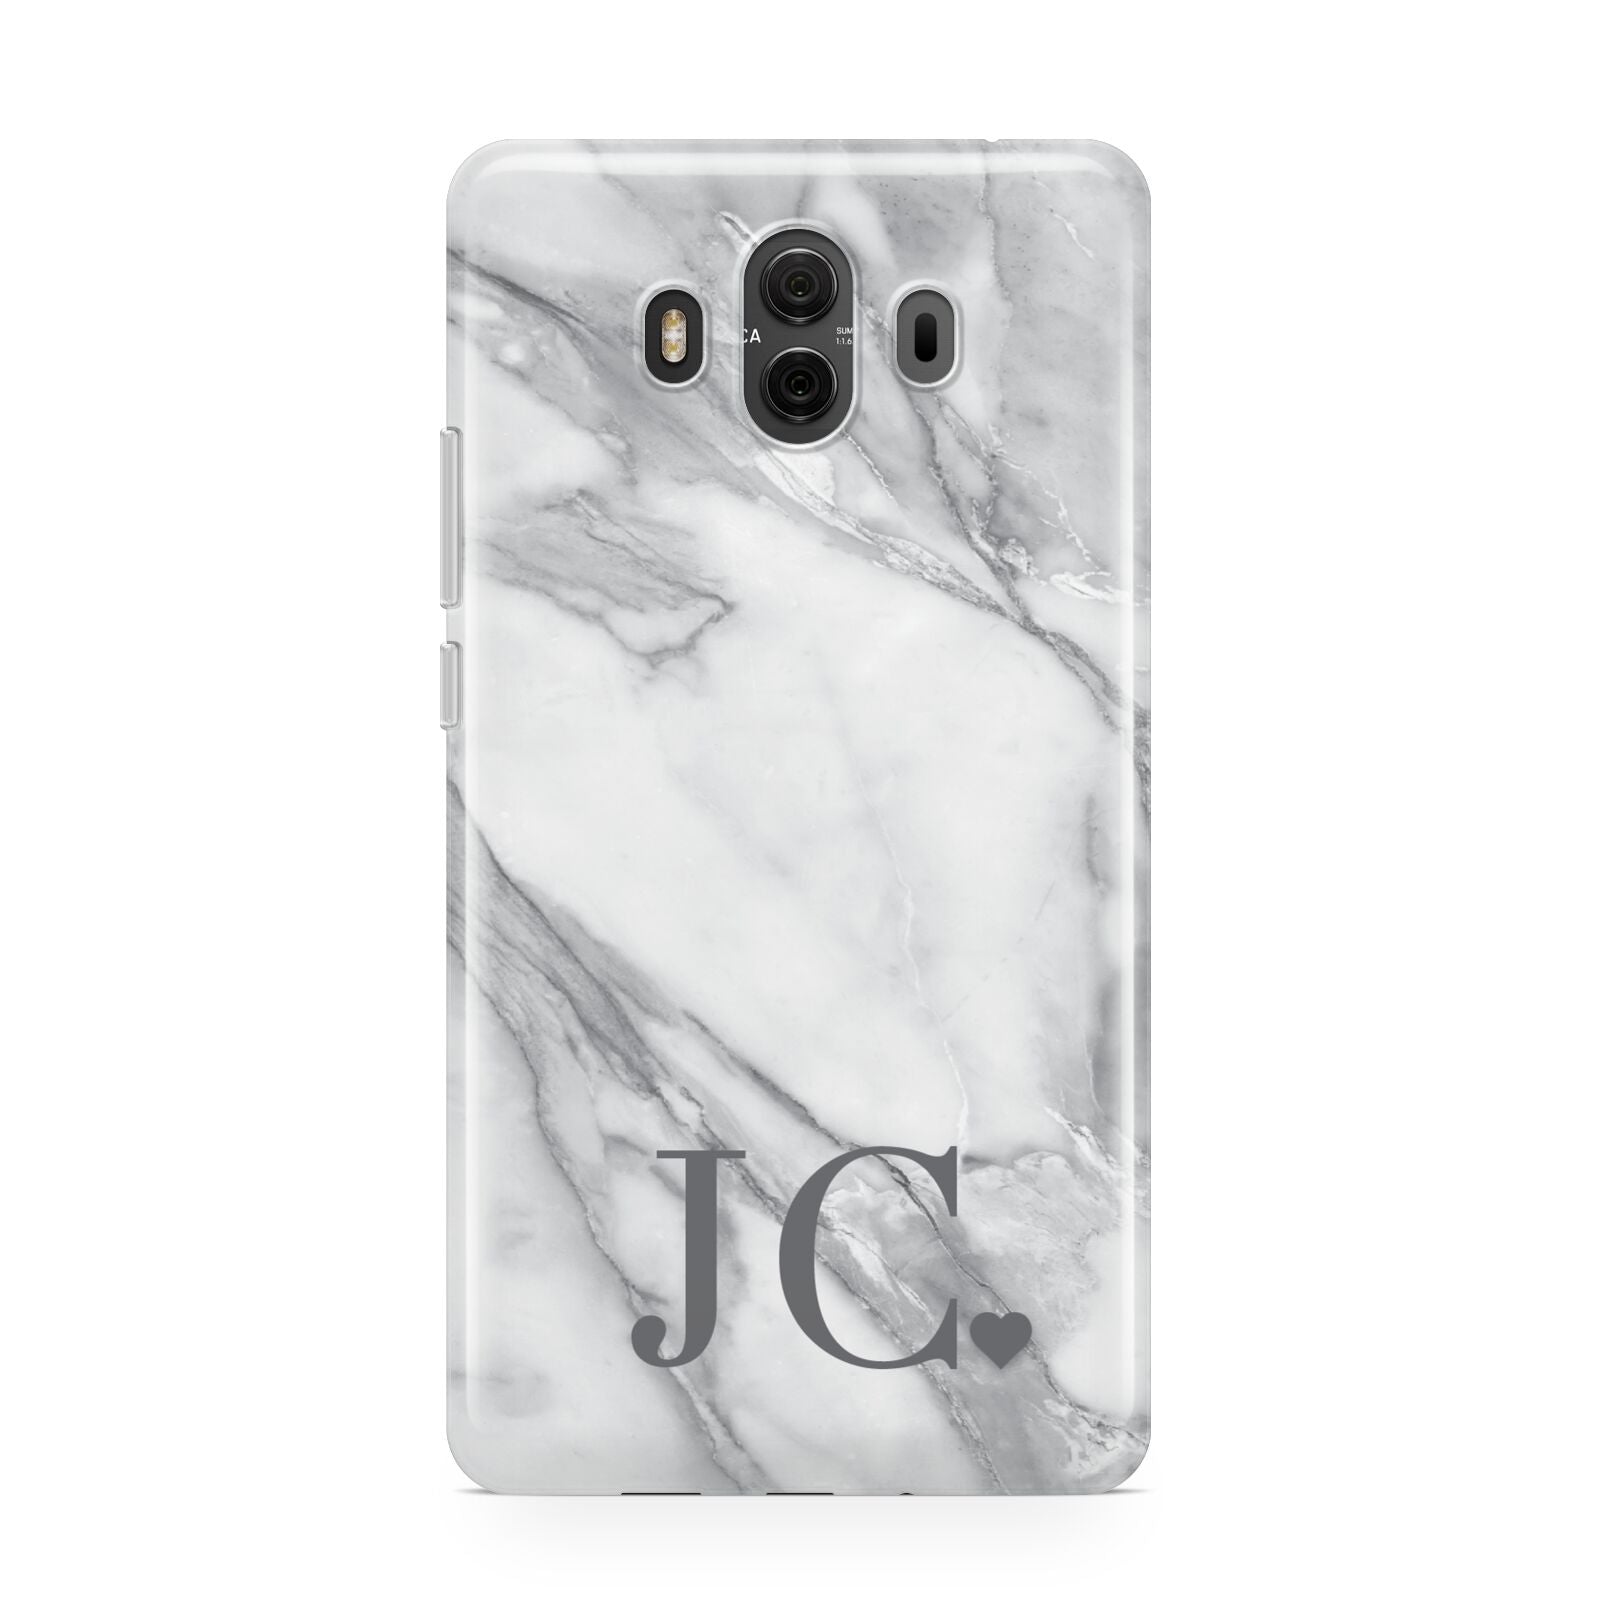 Initials Love Heart Huawei Mate 10 Protective Phone Case